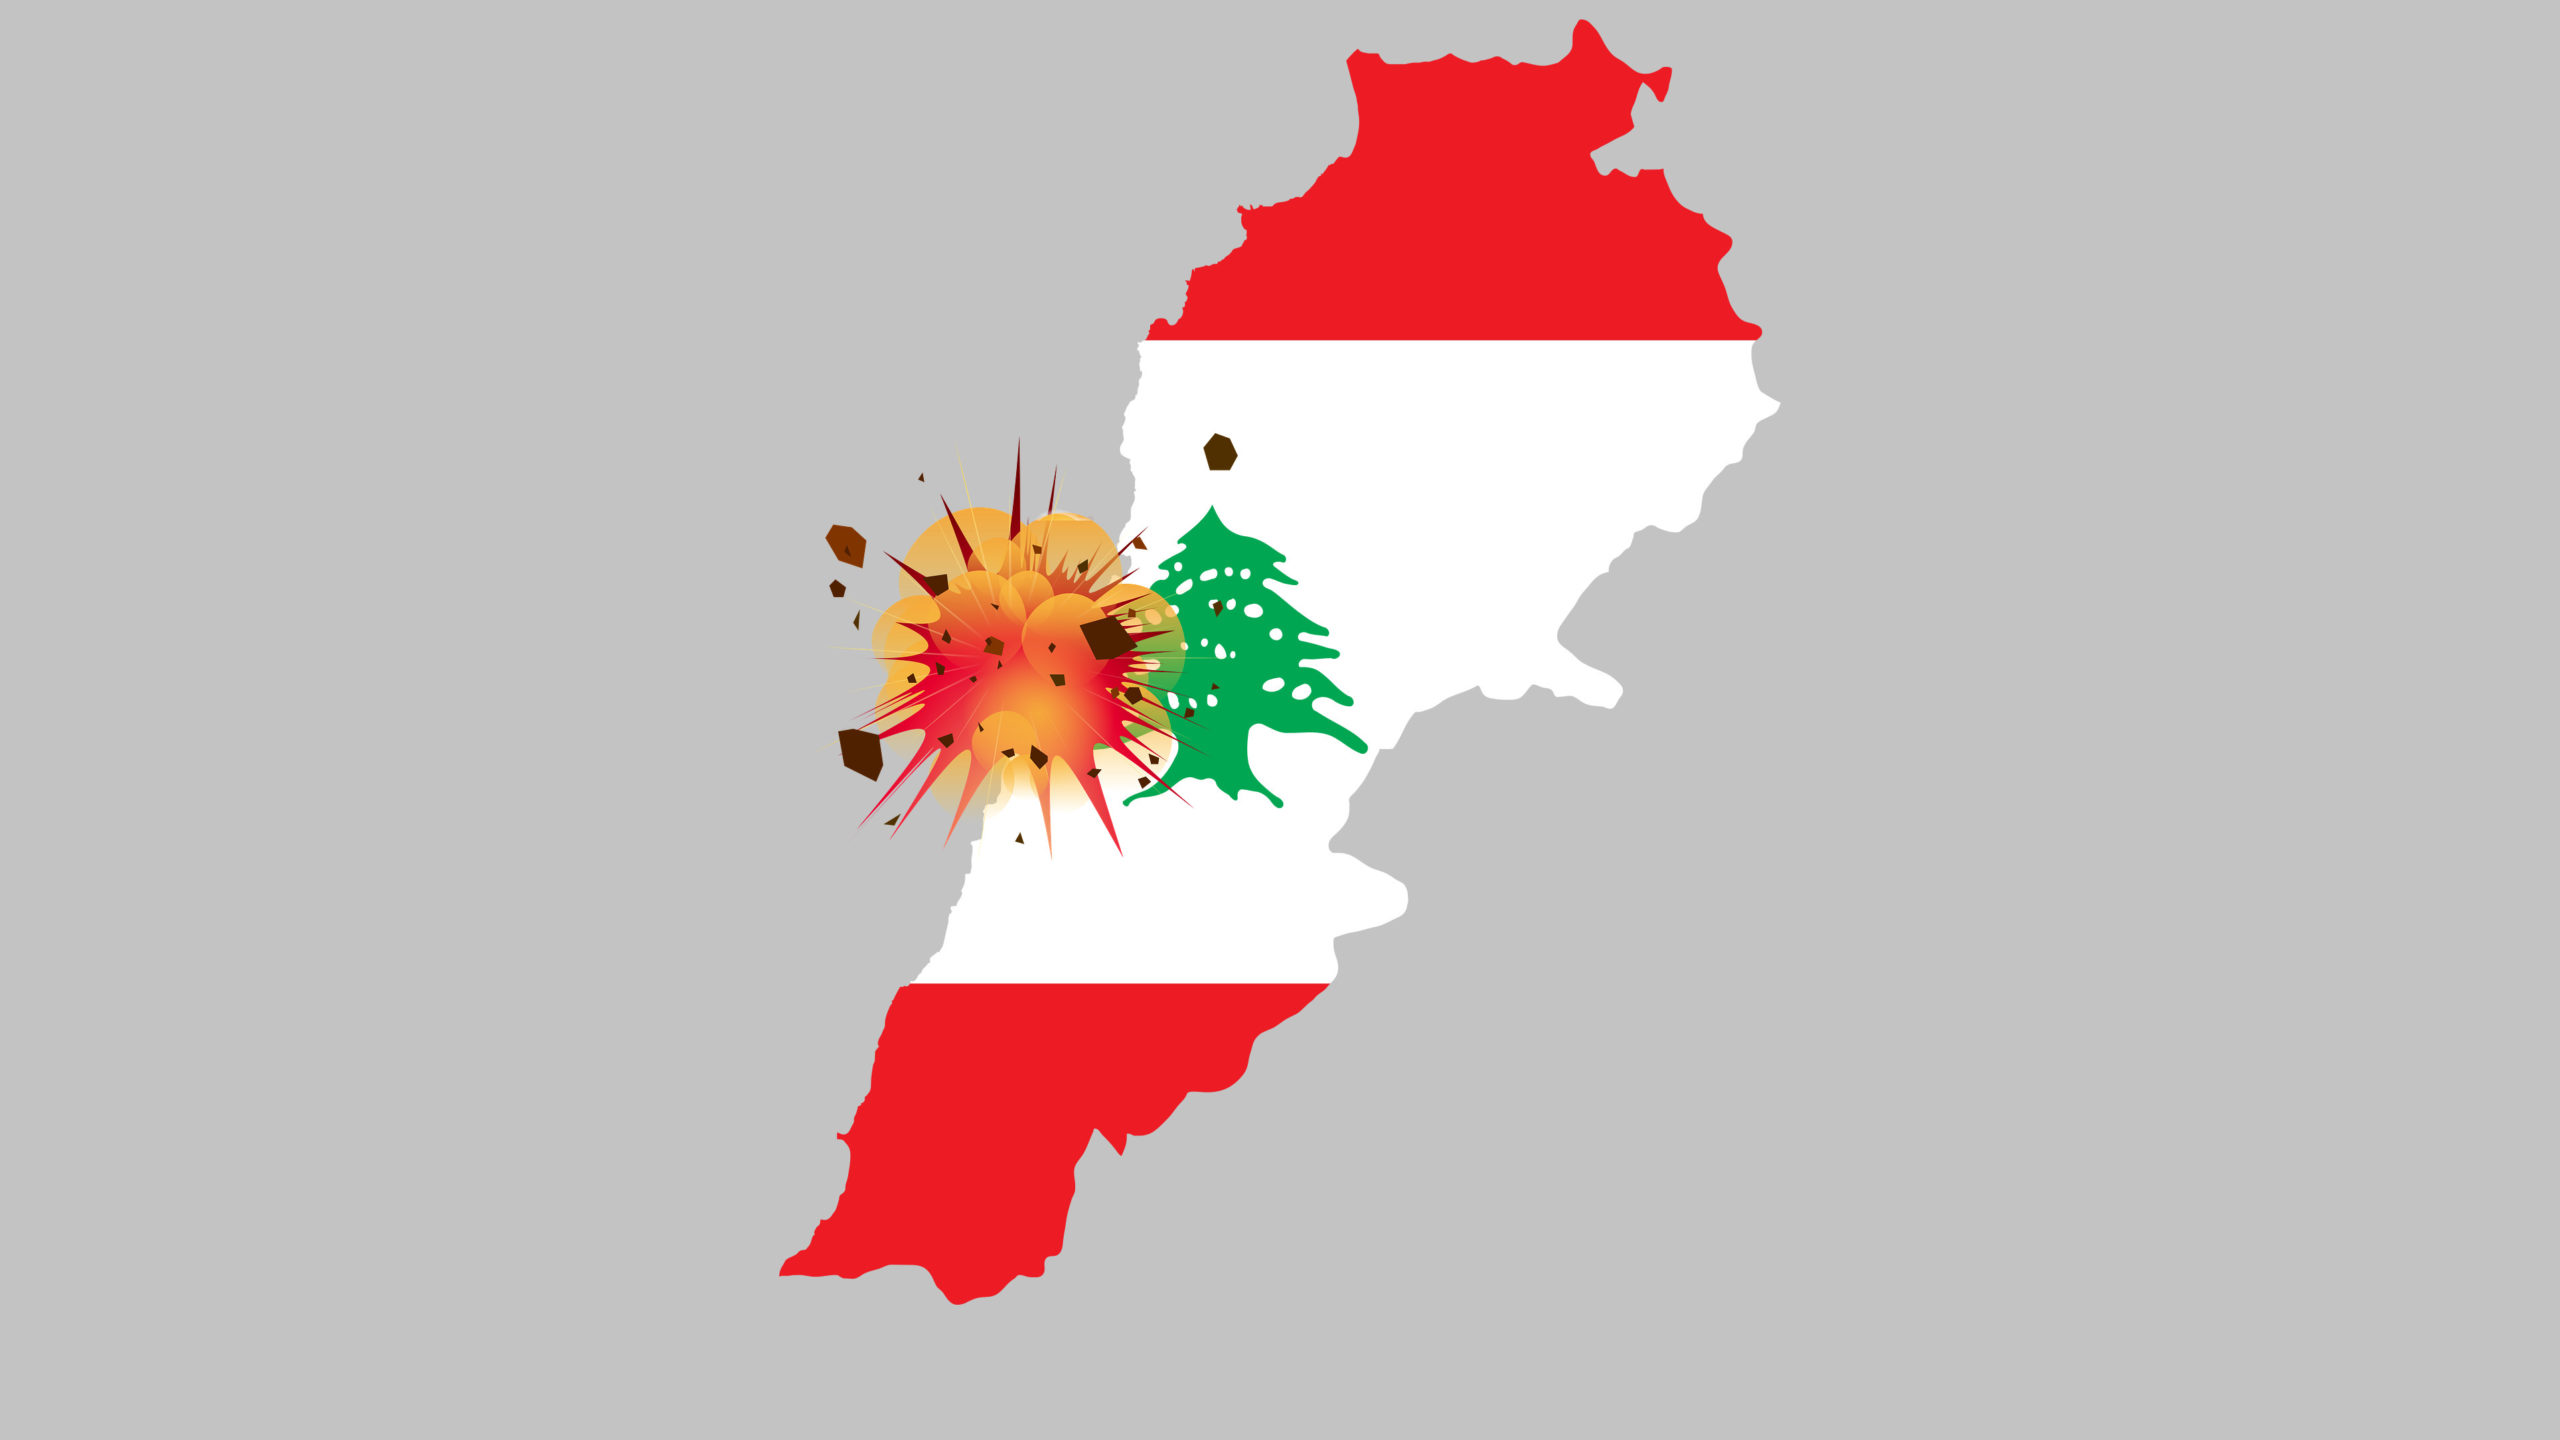 Beirut Suffers Another Explosion, Lebanon Sinks Into Further Turmoil